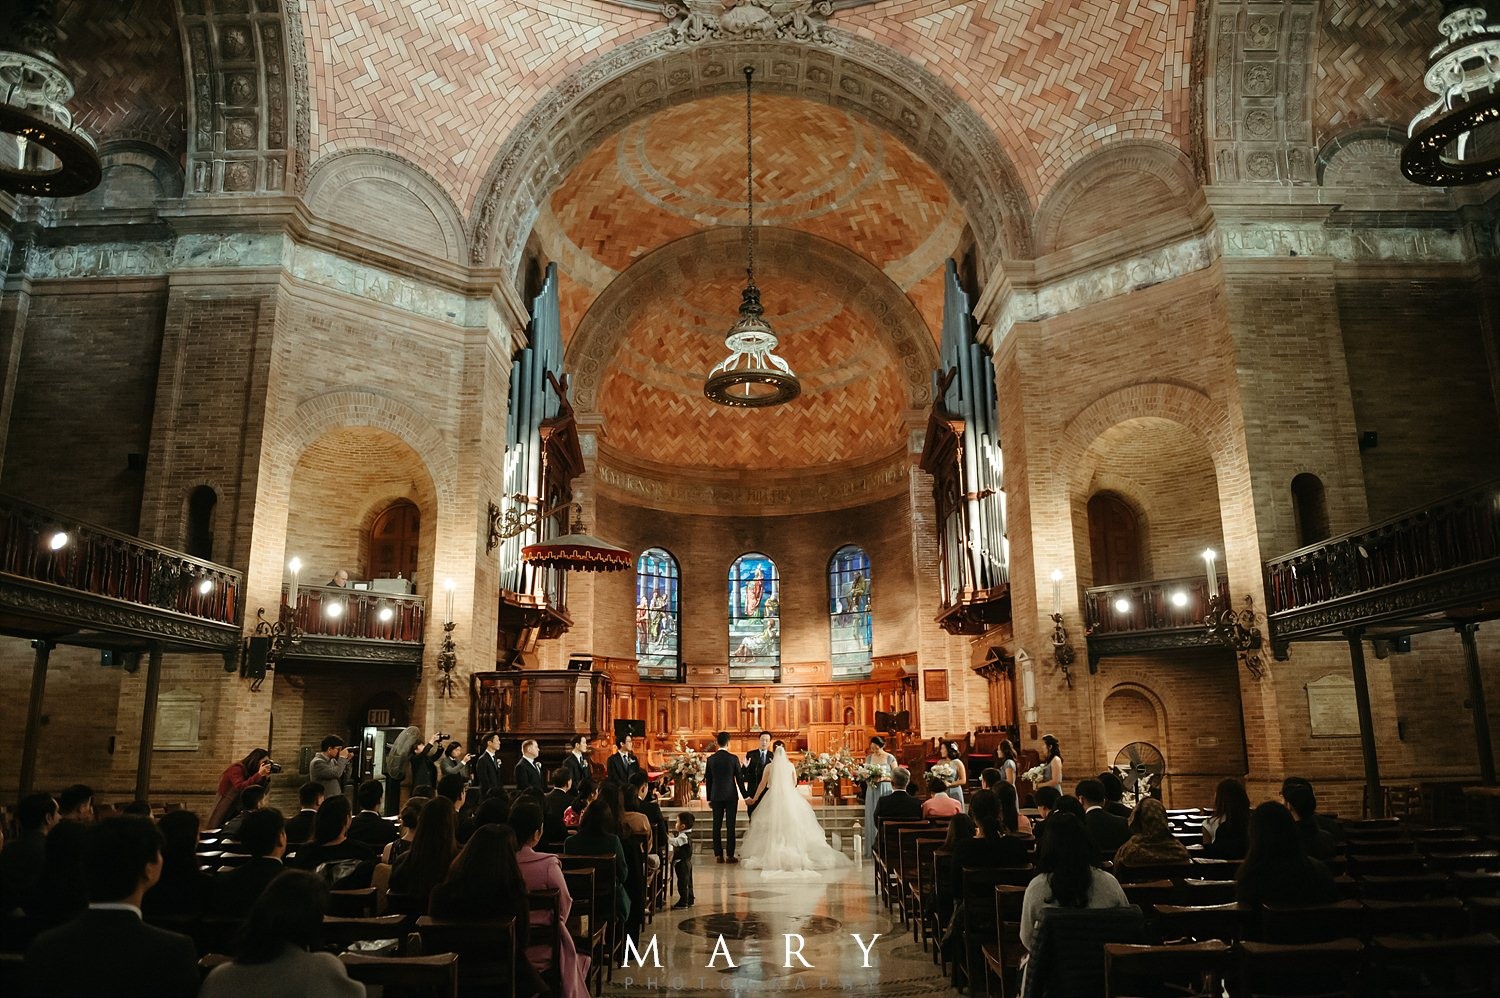 Saint Paul's Chapel is at once grand and intimate—a perfect backdrop for a wedding or other religious ceremony.